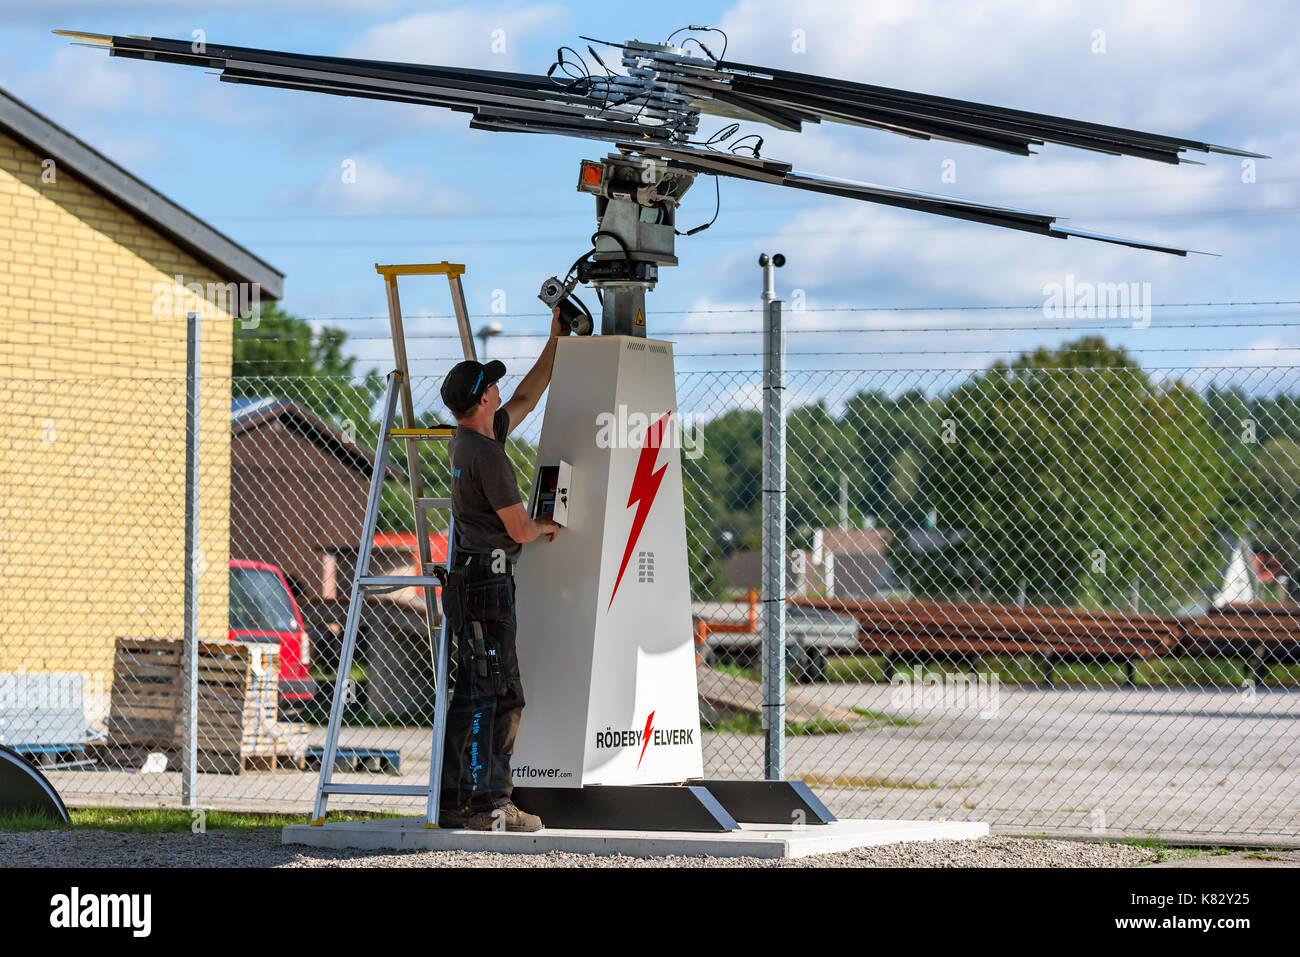 Karlskrona, Sweden - August 28, 2017: Real life documentary of technician working on Smartflower sun tracking solar power station, fans lifted for acc Stock Photo